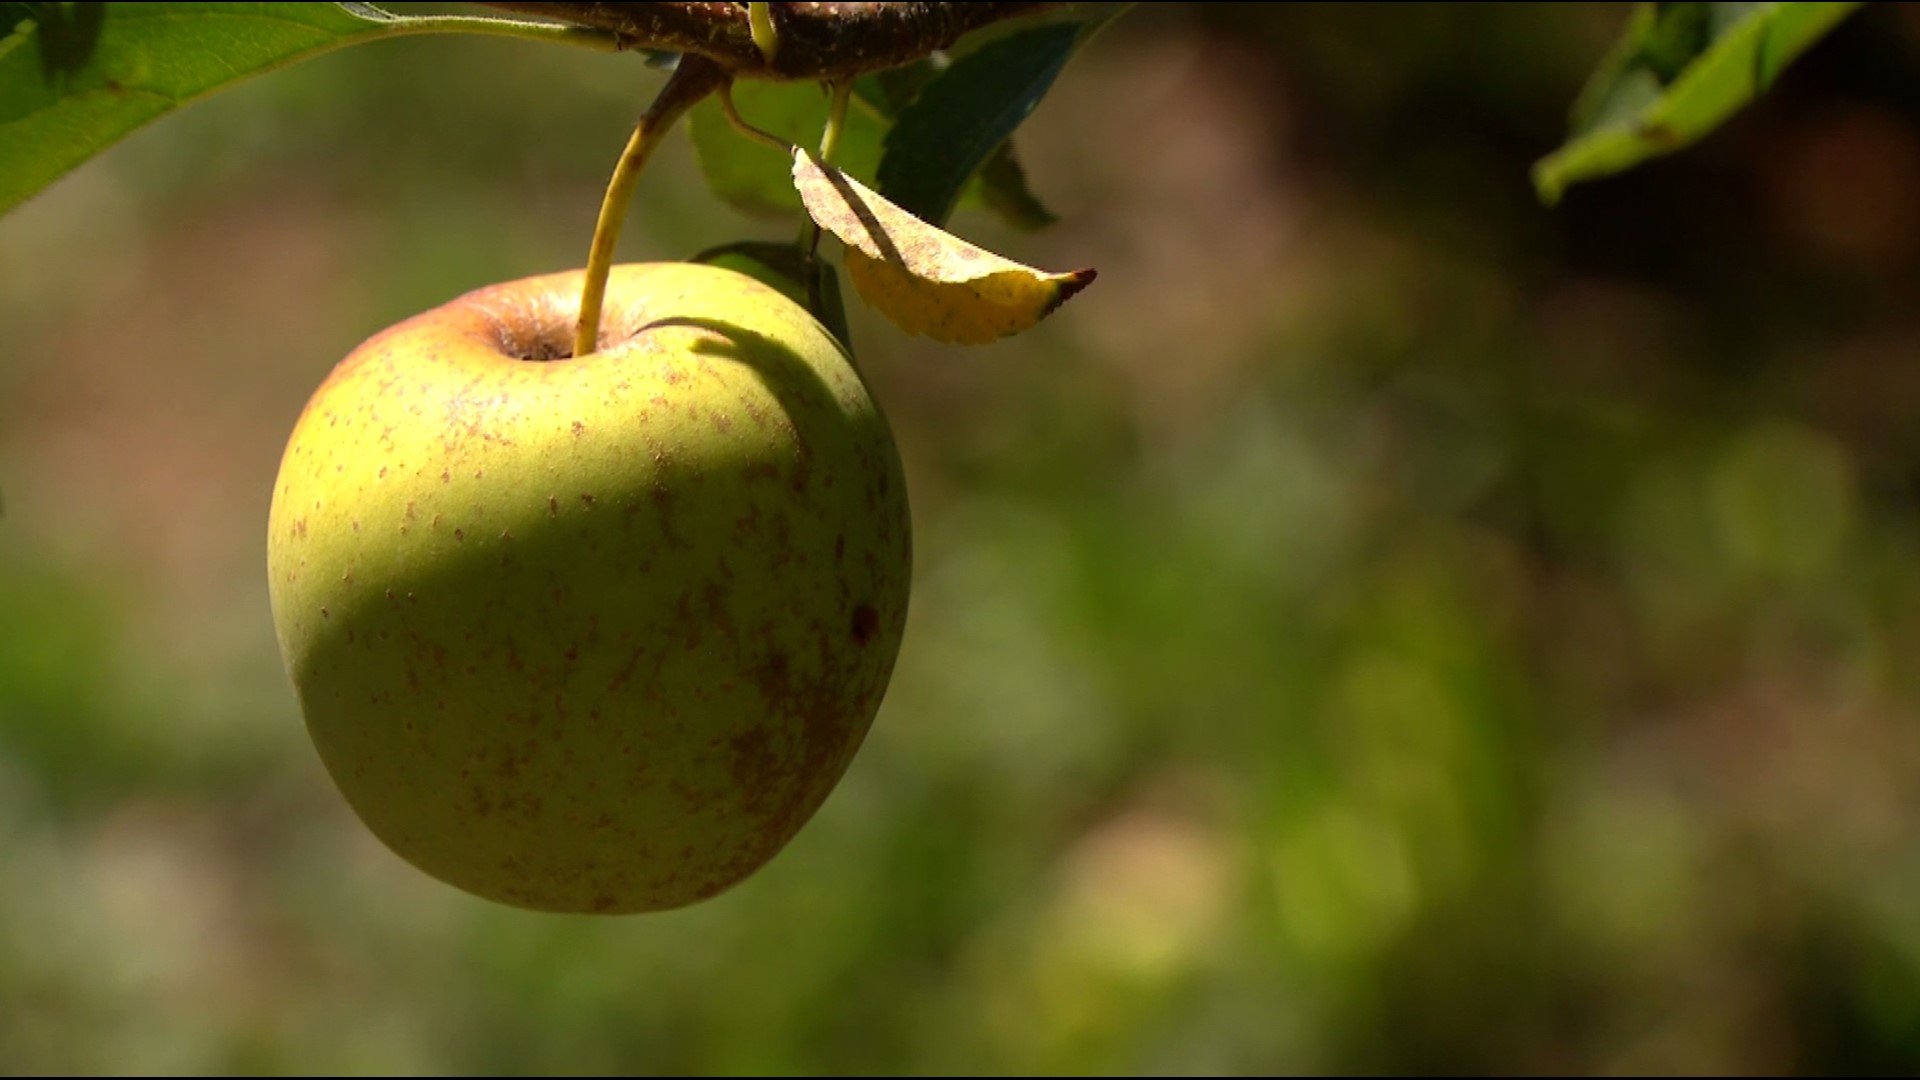 Fall is in the air and that means it's time to pick apples at Julian orchards.